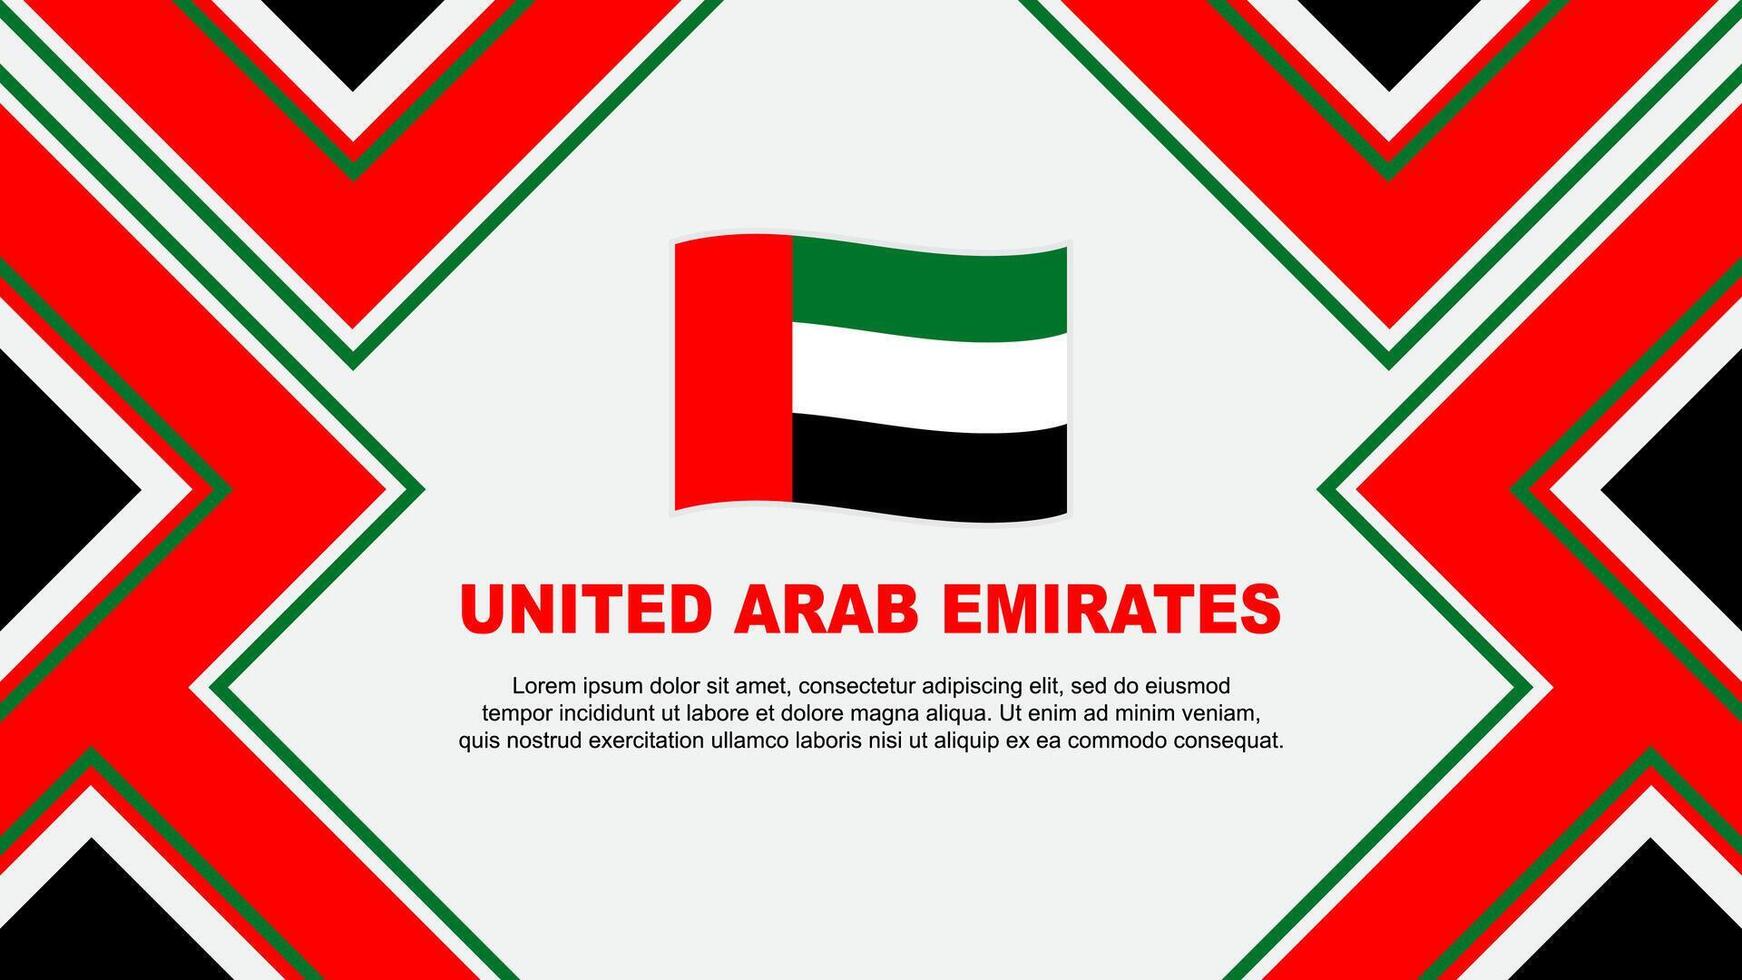 United Arab Emirates Flag Abstract Background Design Template. United Arab Emirates Independence Day Banner Wallpaper Vector Illustration. Vector